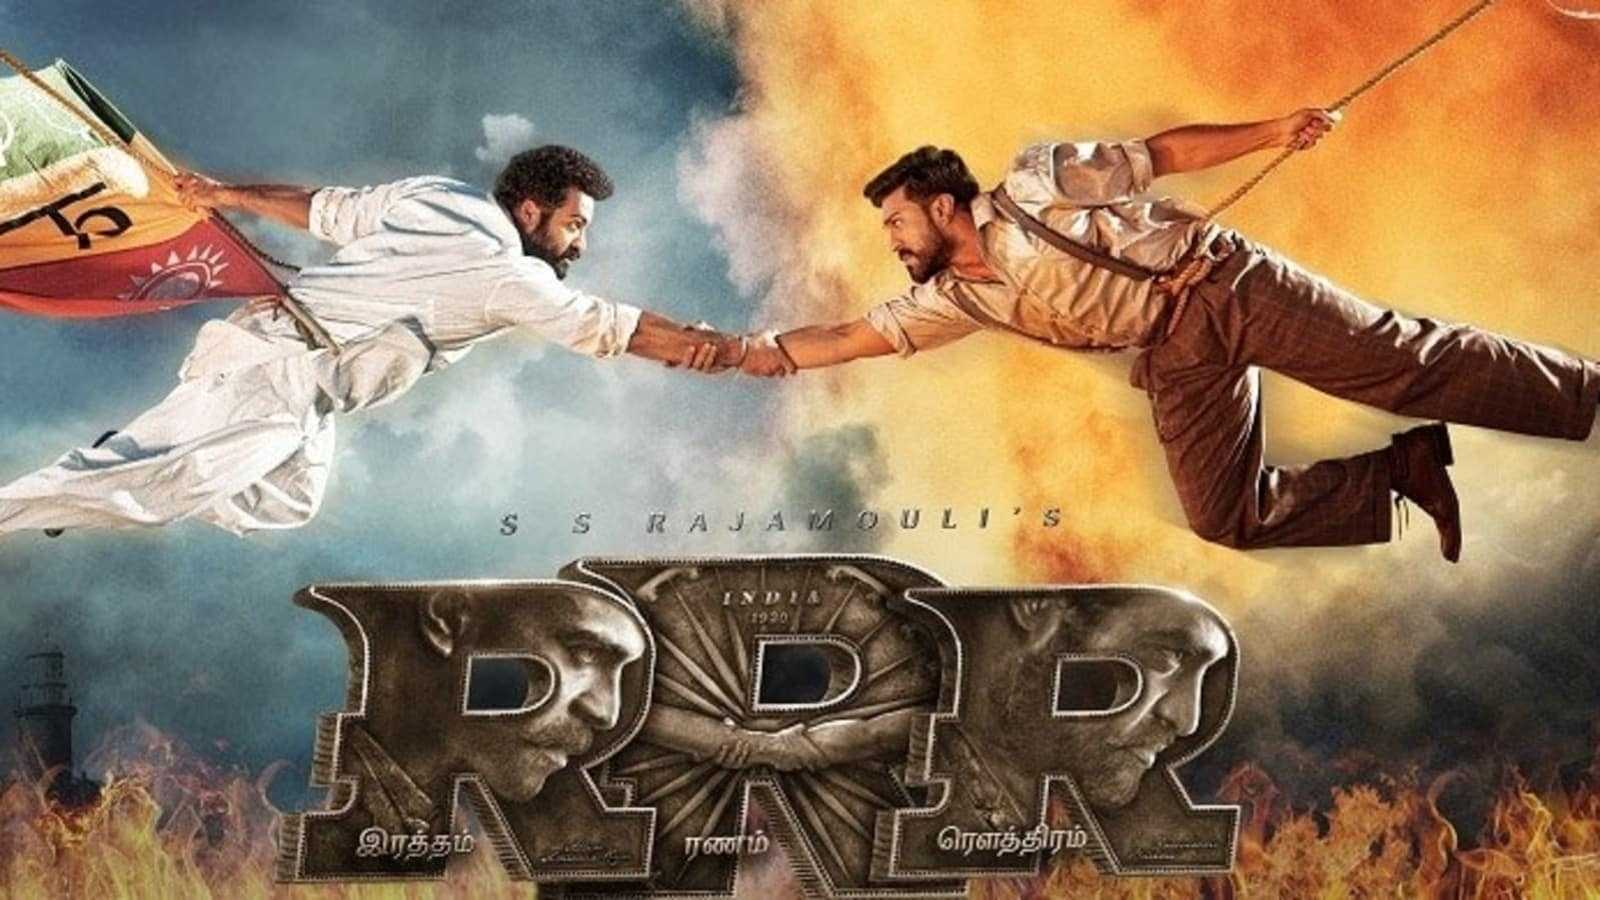 'RRR' raises 410 million yen at Japanese box office, becomes highest grossing Indian film in the country